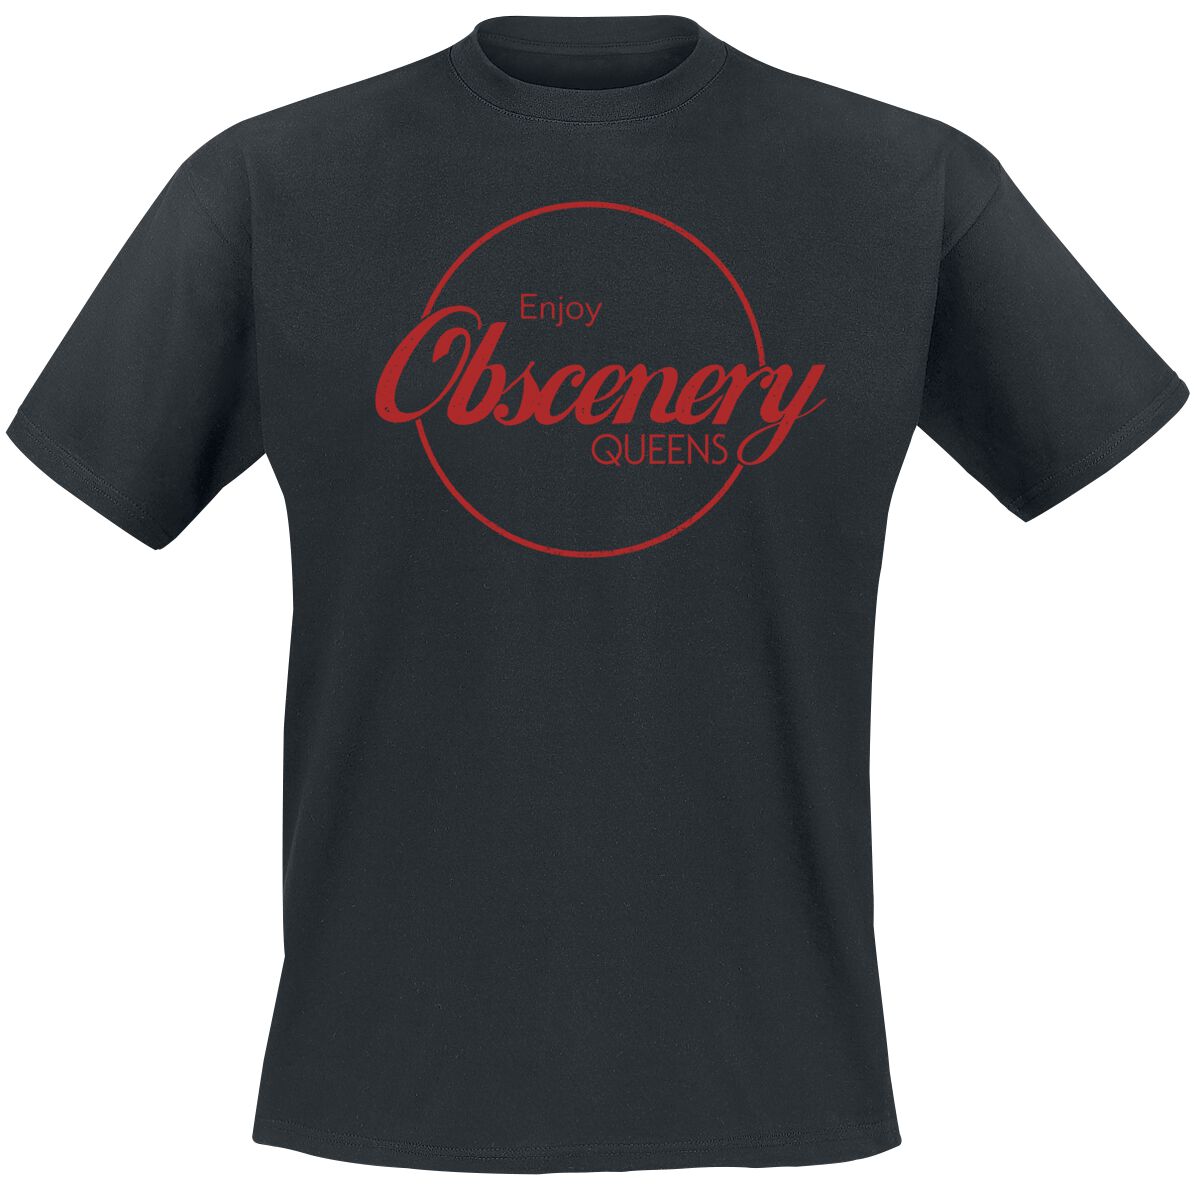 Queens Of The Stone Age Enjoy Obscenery T-Shirt schwarz in M